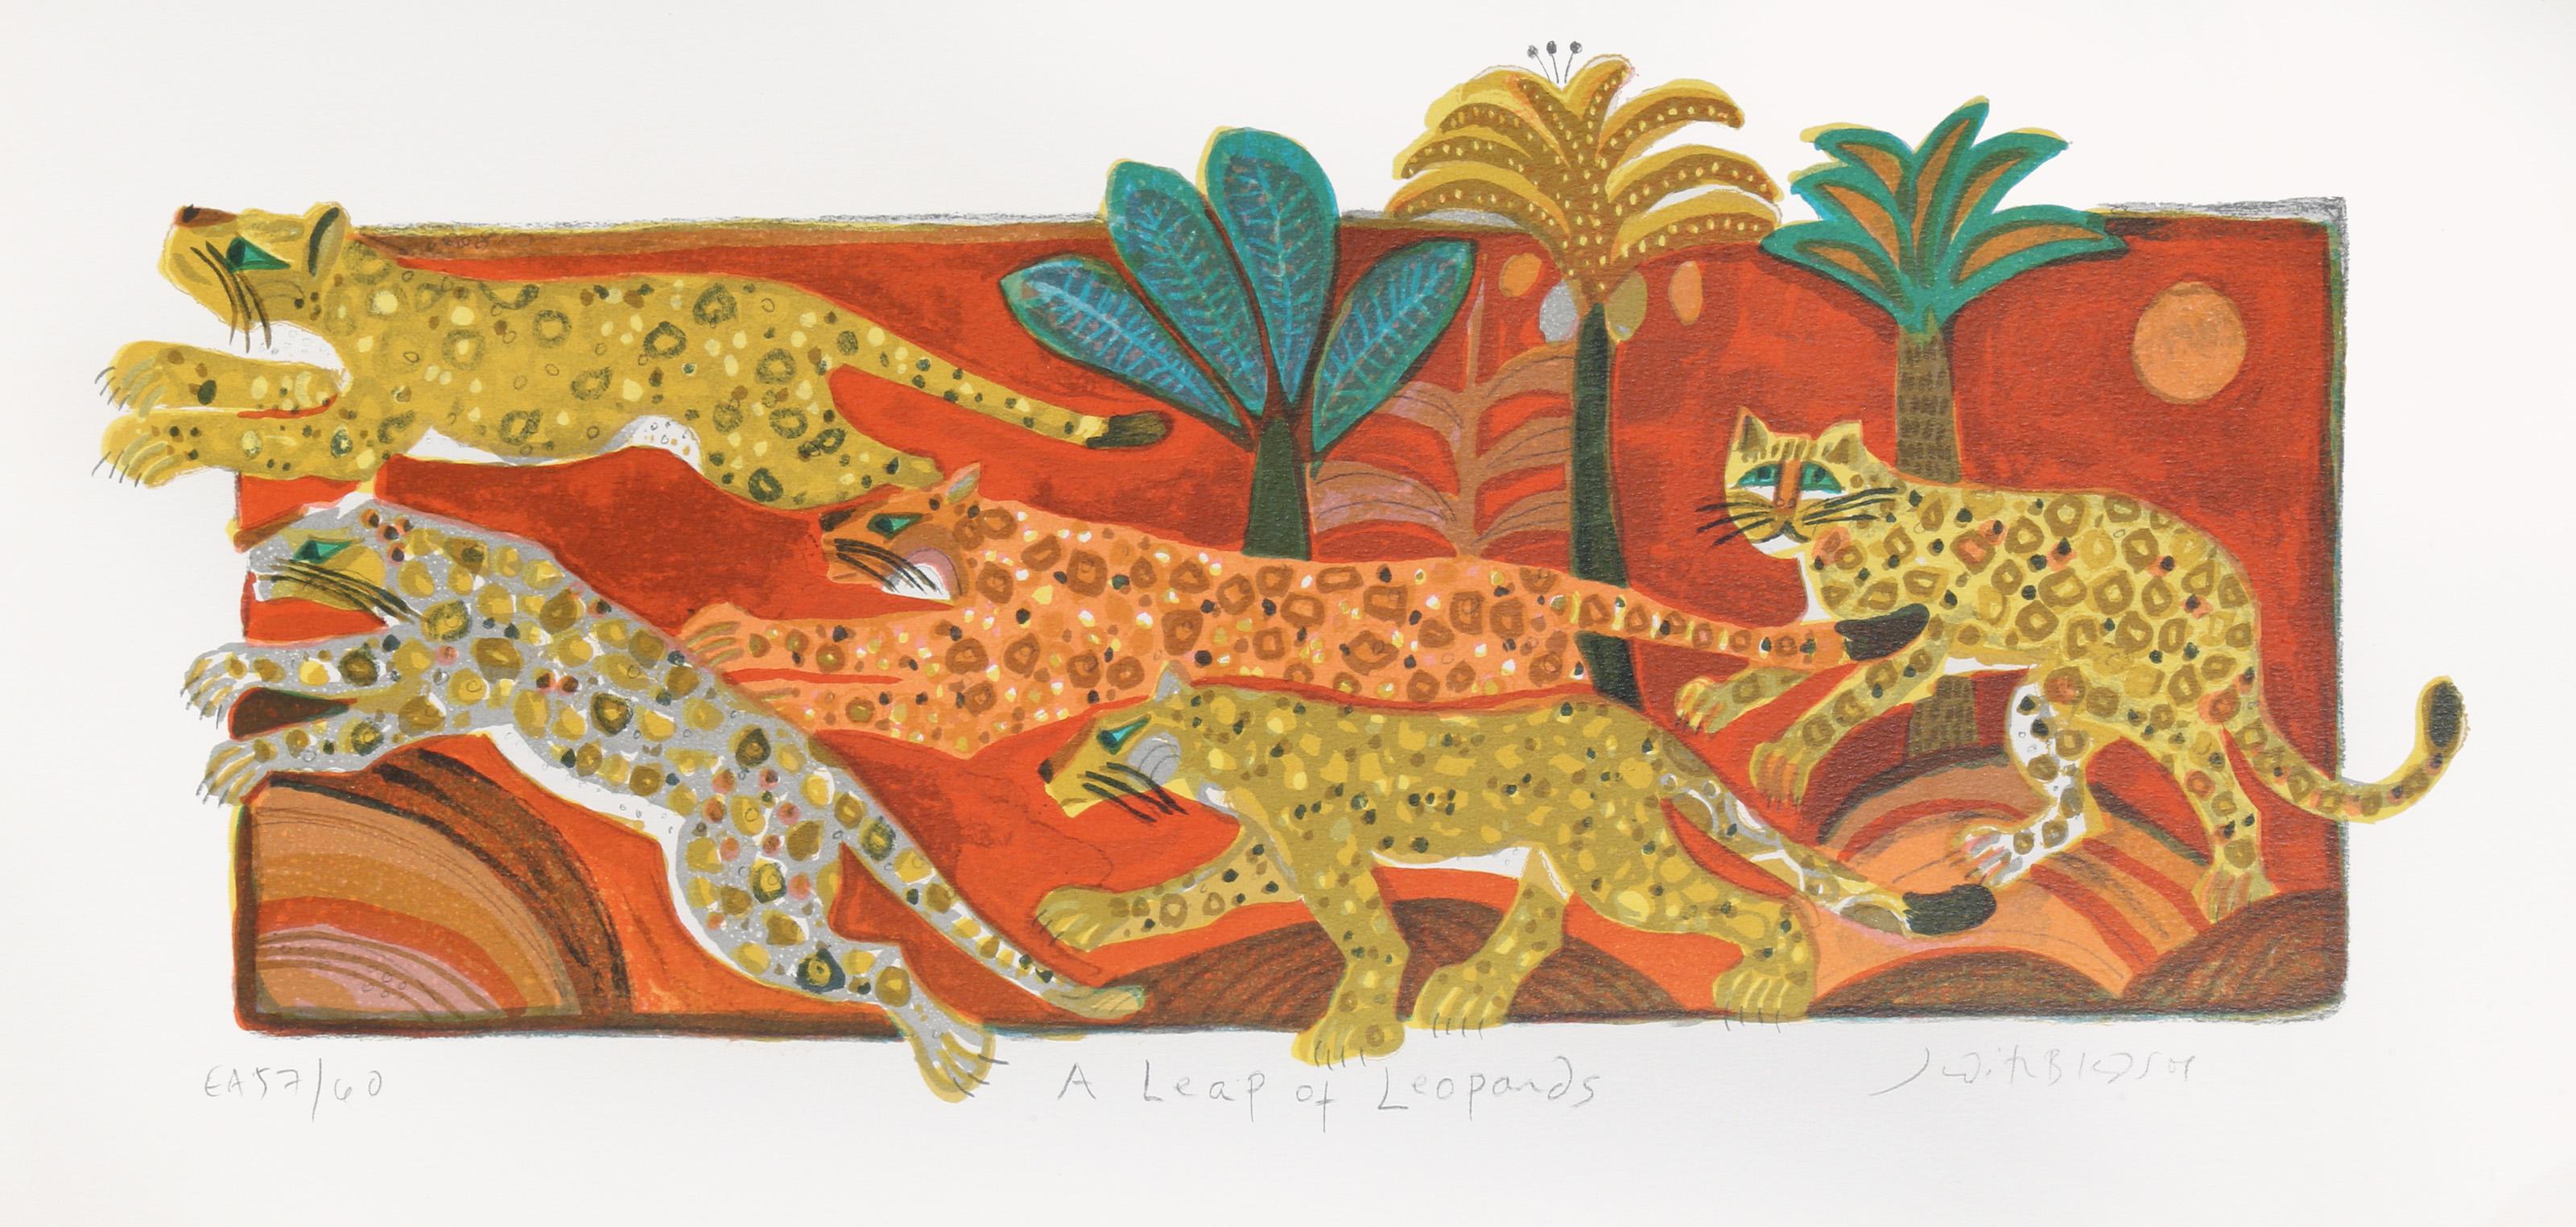 Judith Bledsoe, American (1938 - 2013) -  A Leap of Leopards. Year: circa 1974, Medium: Lithograph, signed in pencil, Edition: EA 57/60, Image Size: 8.5 x 13 inches, Size: 11.5  x 23 in. (29.21  x 58.42 cm), Description: Graceful and mighty, the